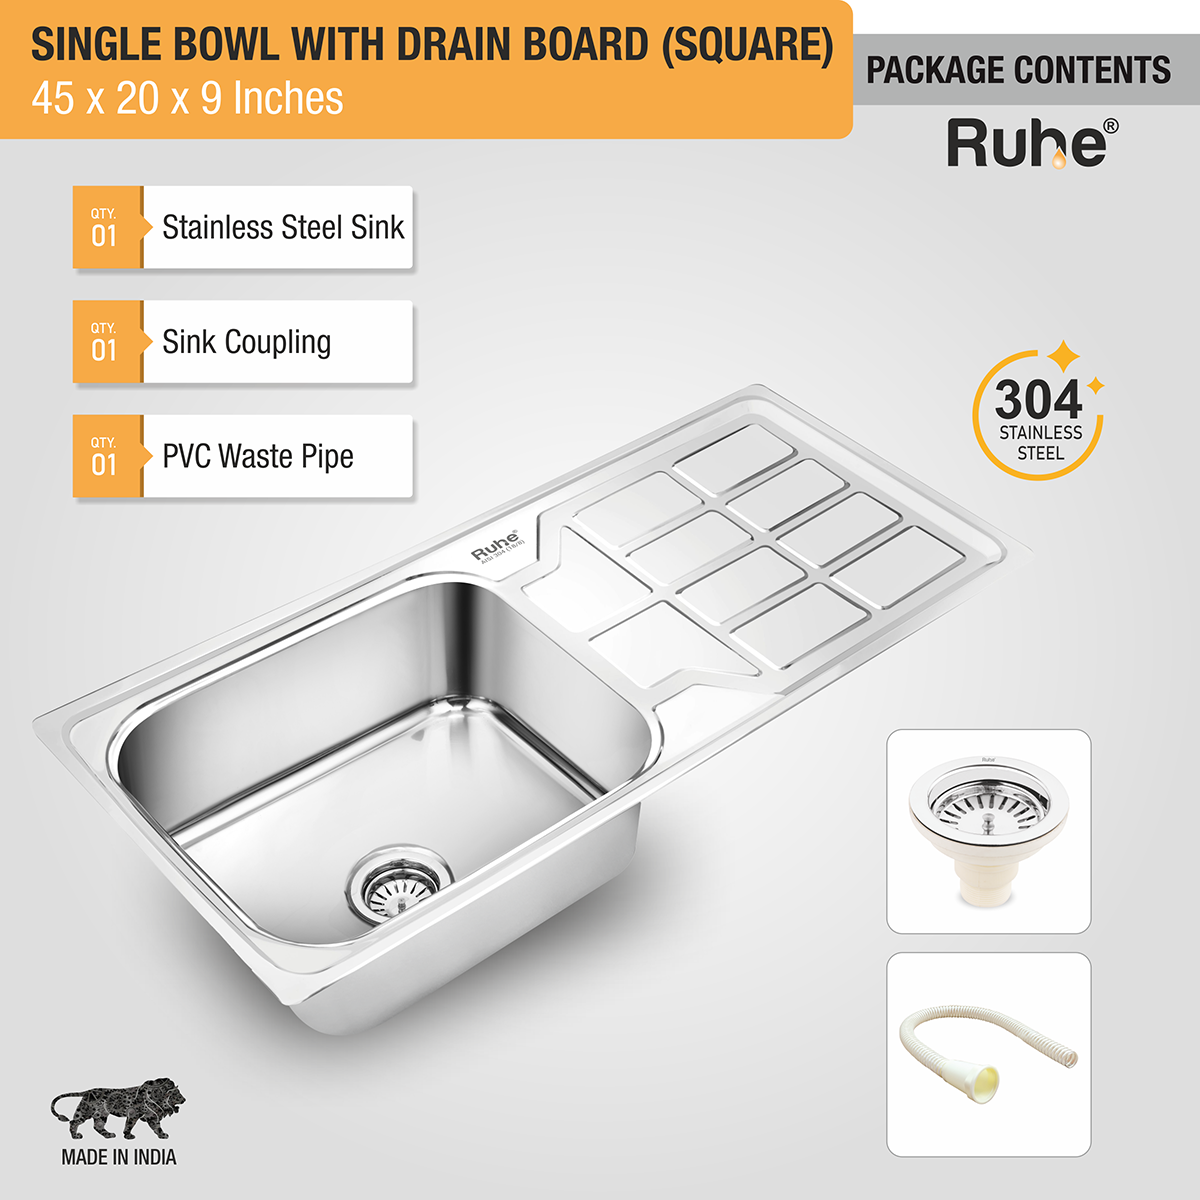 Square Single Bowl (45 x 20 x 9 Inches) 304-Grade Stainless Steel Kitchen Sink with Drainboard, coupling, waste pipe